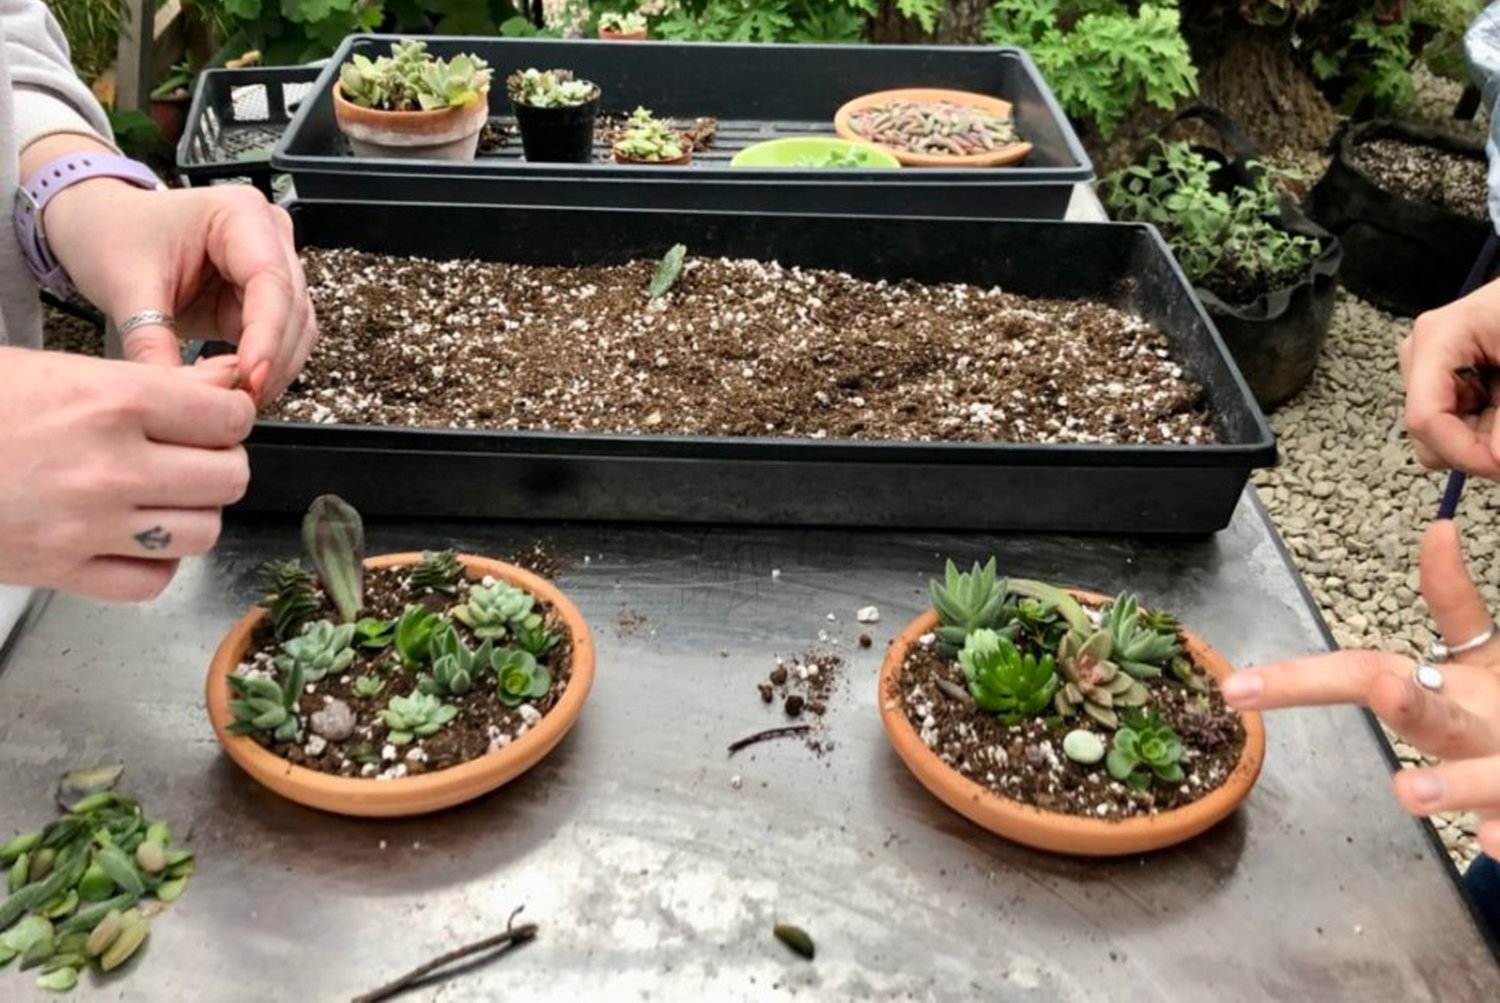 Fairy garden workshops are among the farm’s nature-focused programming